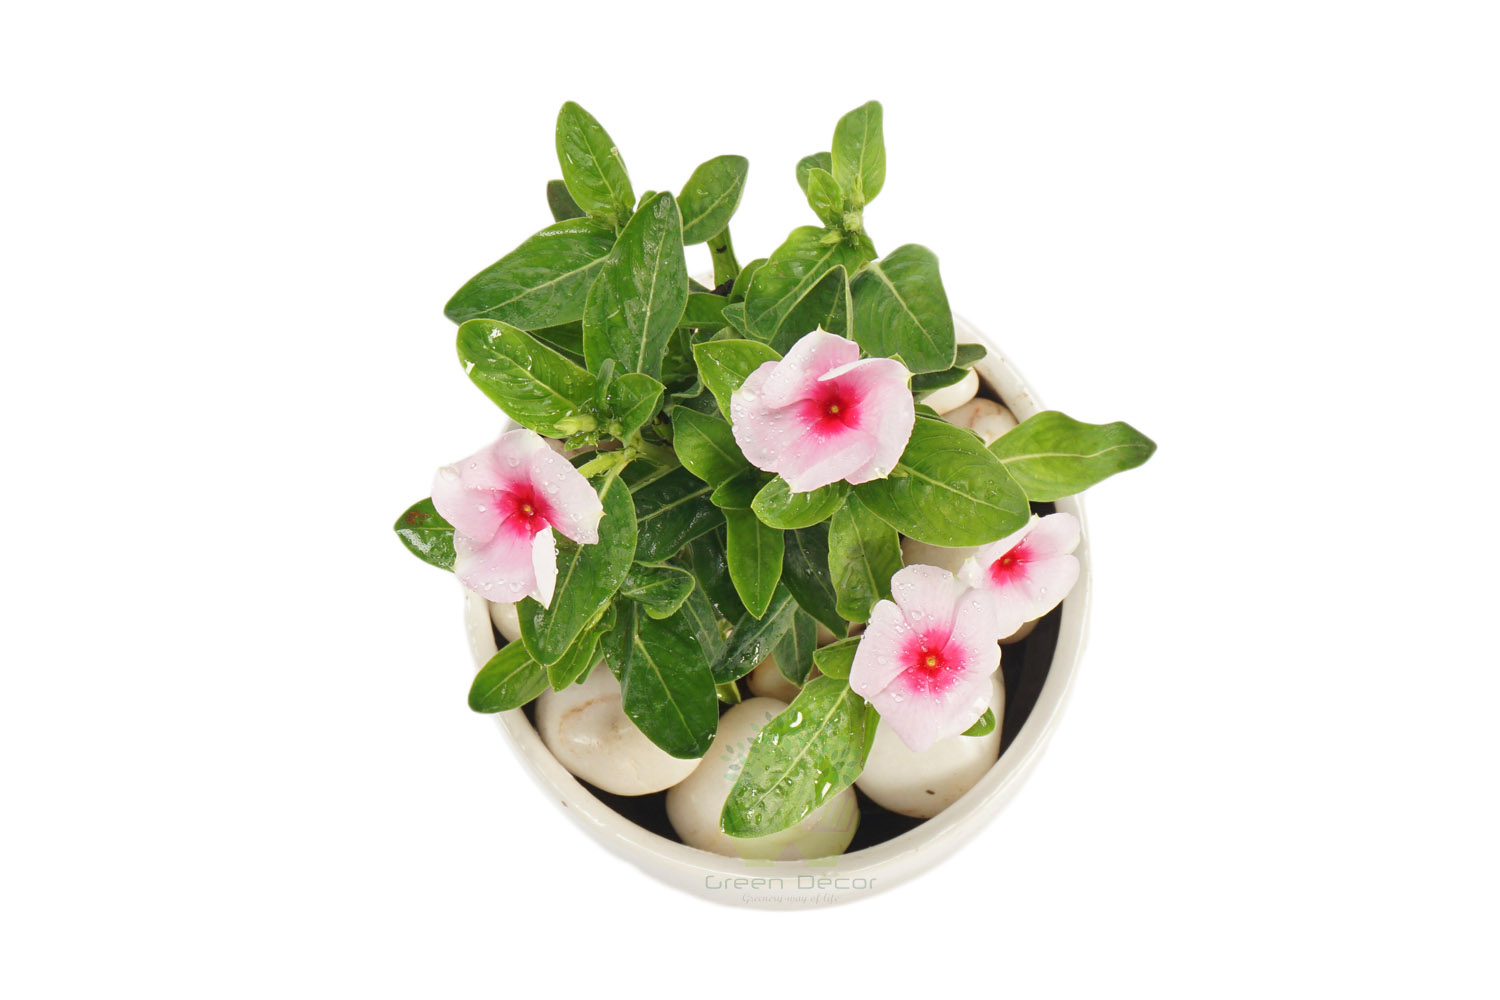 Buy Periwinkle pink Plants , White Pots and seeds in Delhi NCR by the best online nursery shop Greendecor.